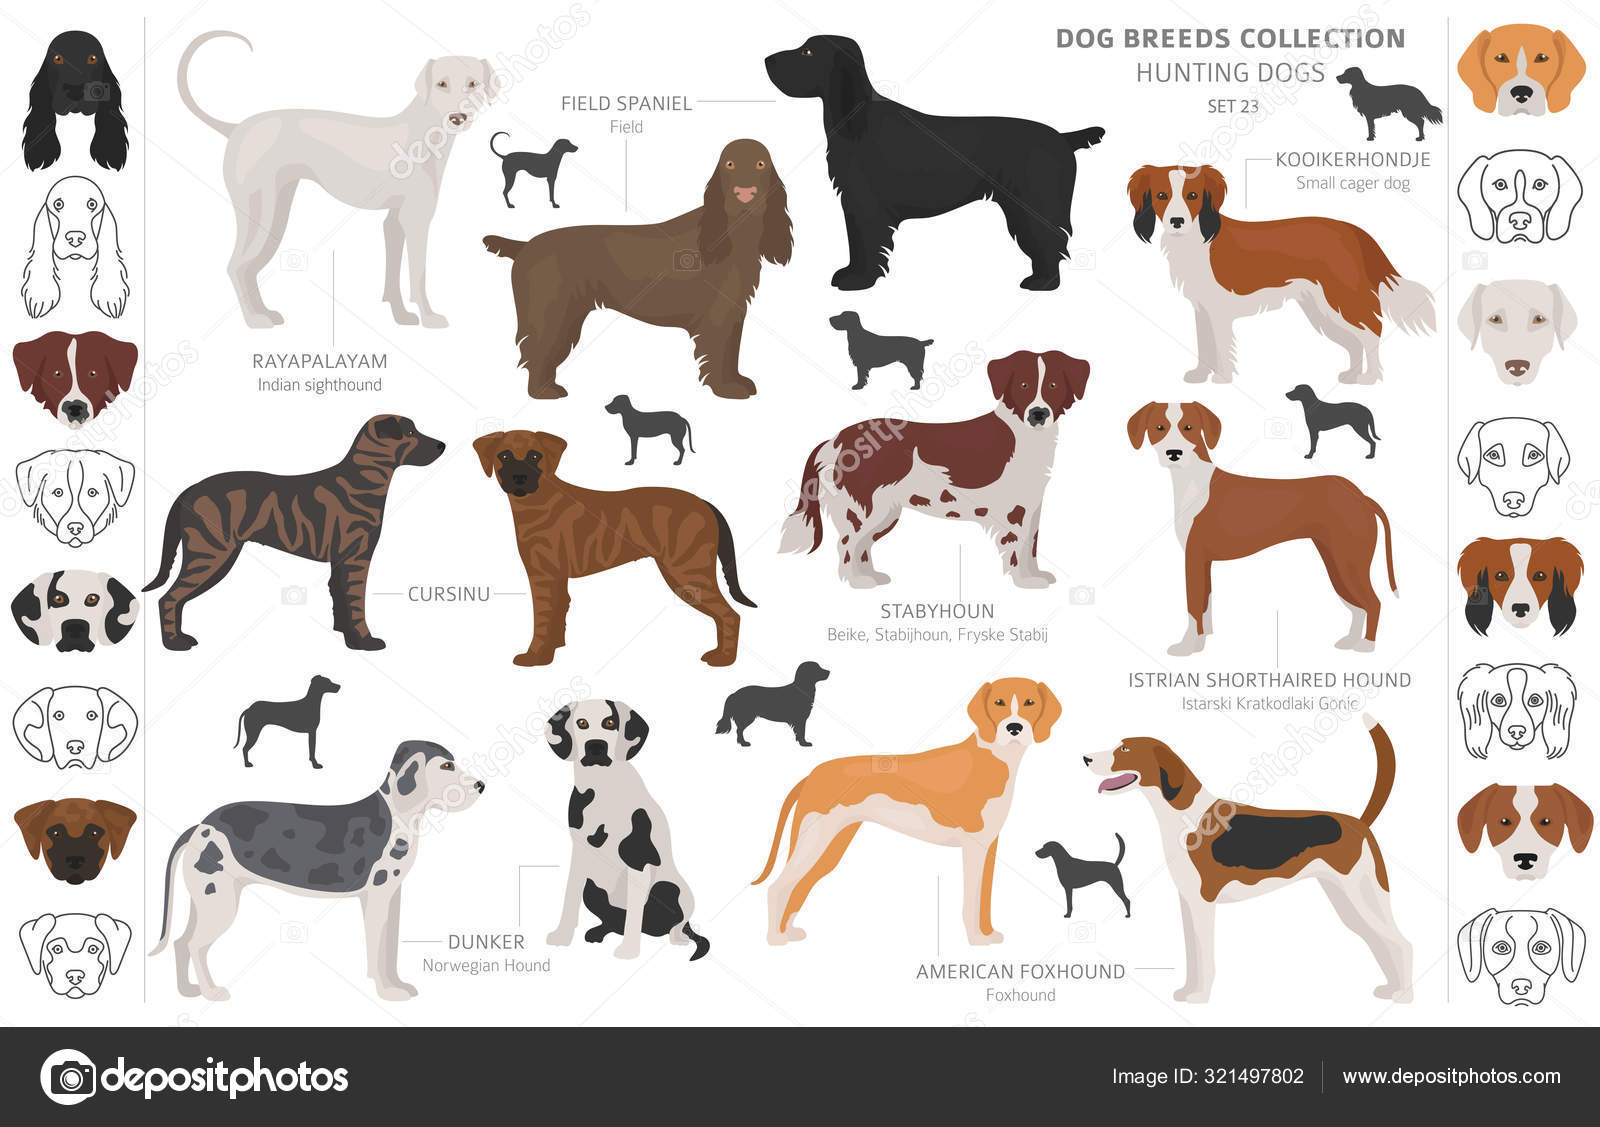 should i get a istrian shorthaired hound